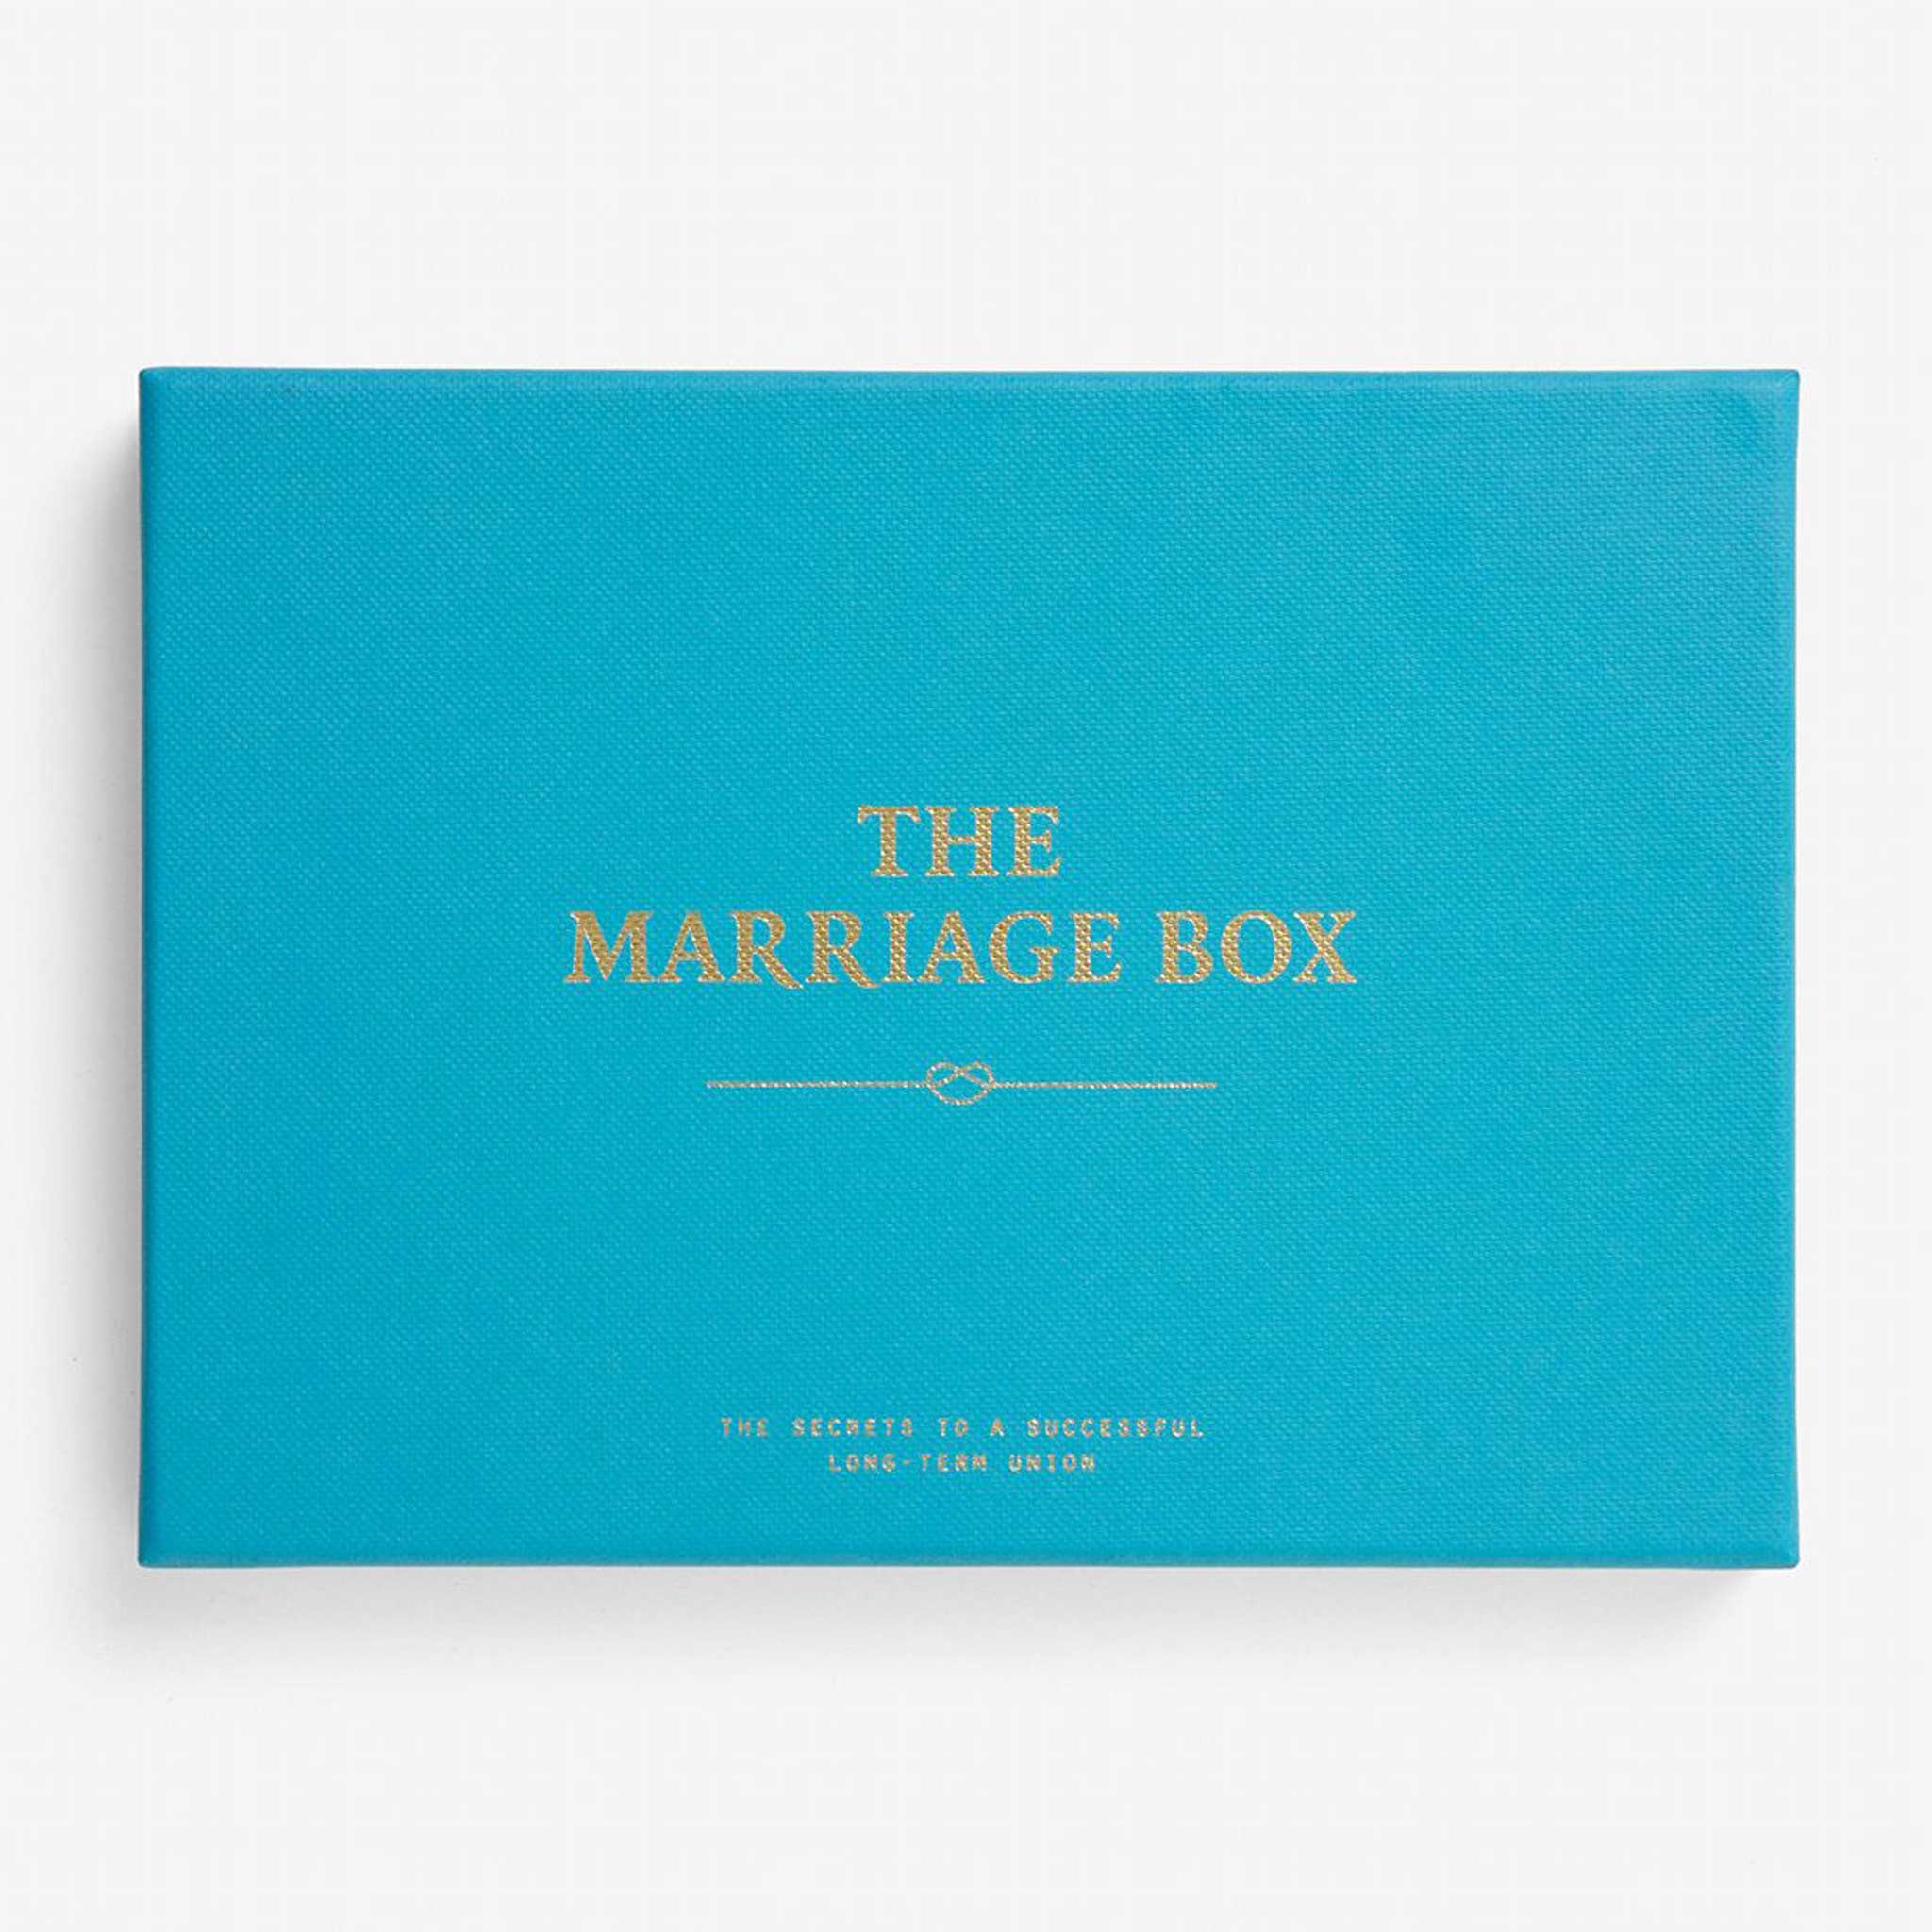 THE MARRIAGE BOX | Hochzeit-KARTENSET | English Edition | The School of Life